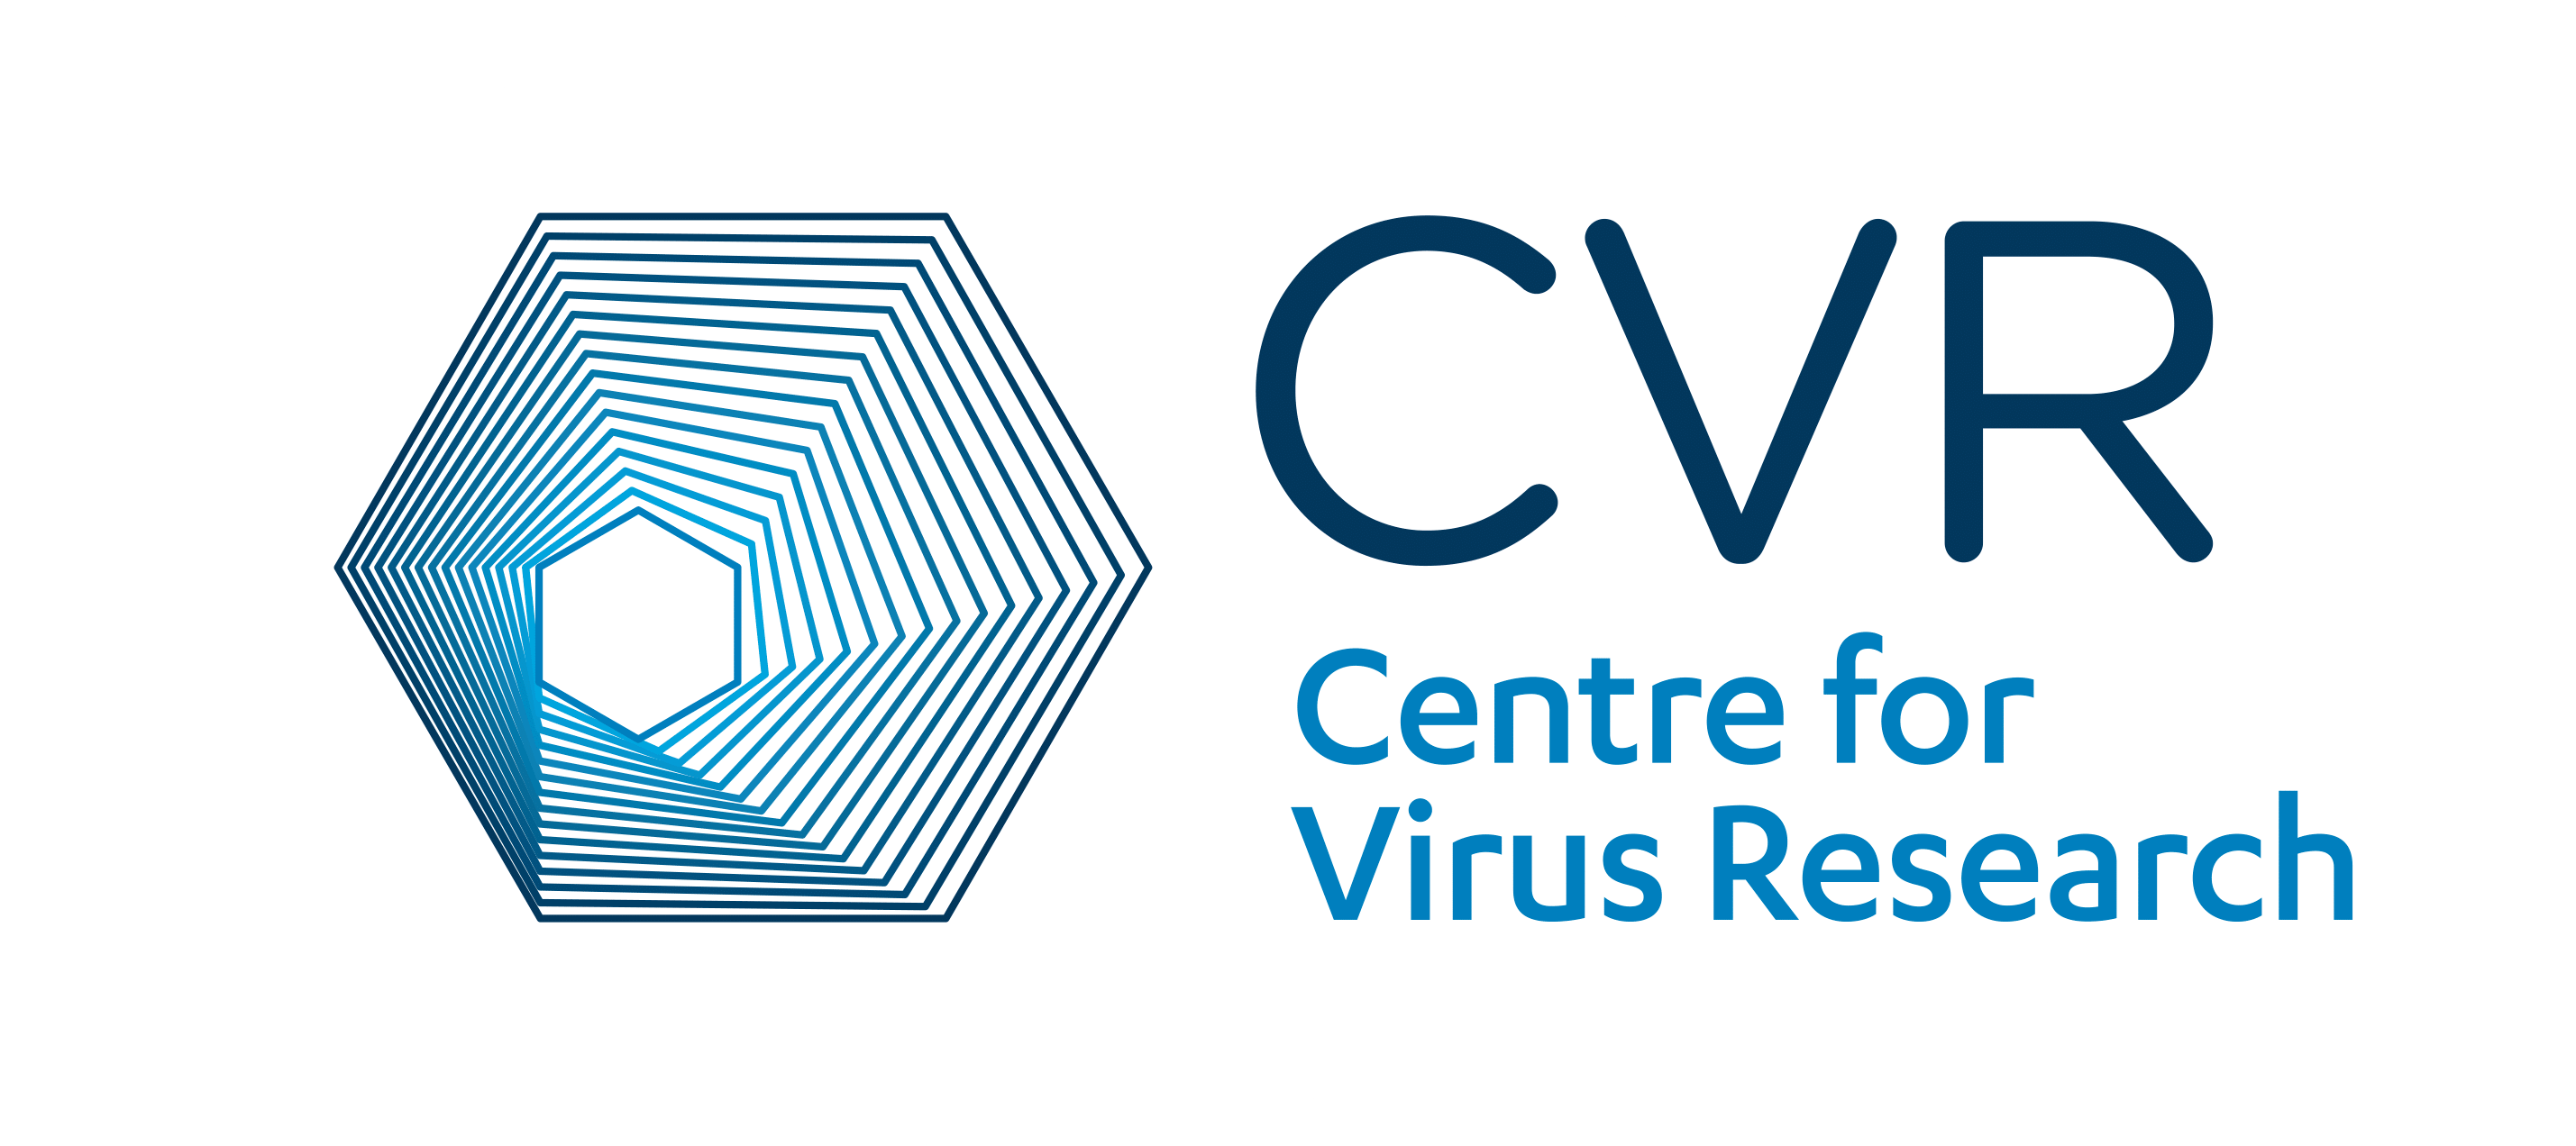 Centre for Virus Research